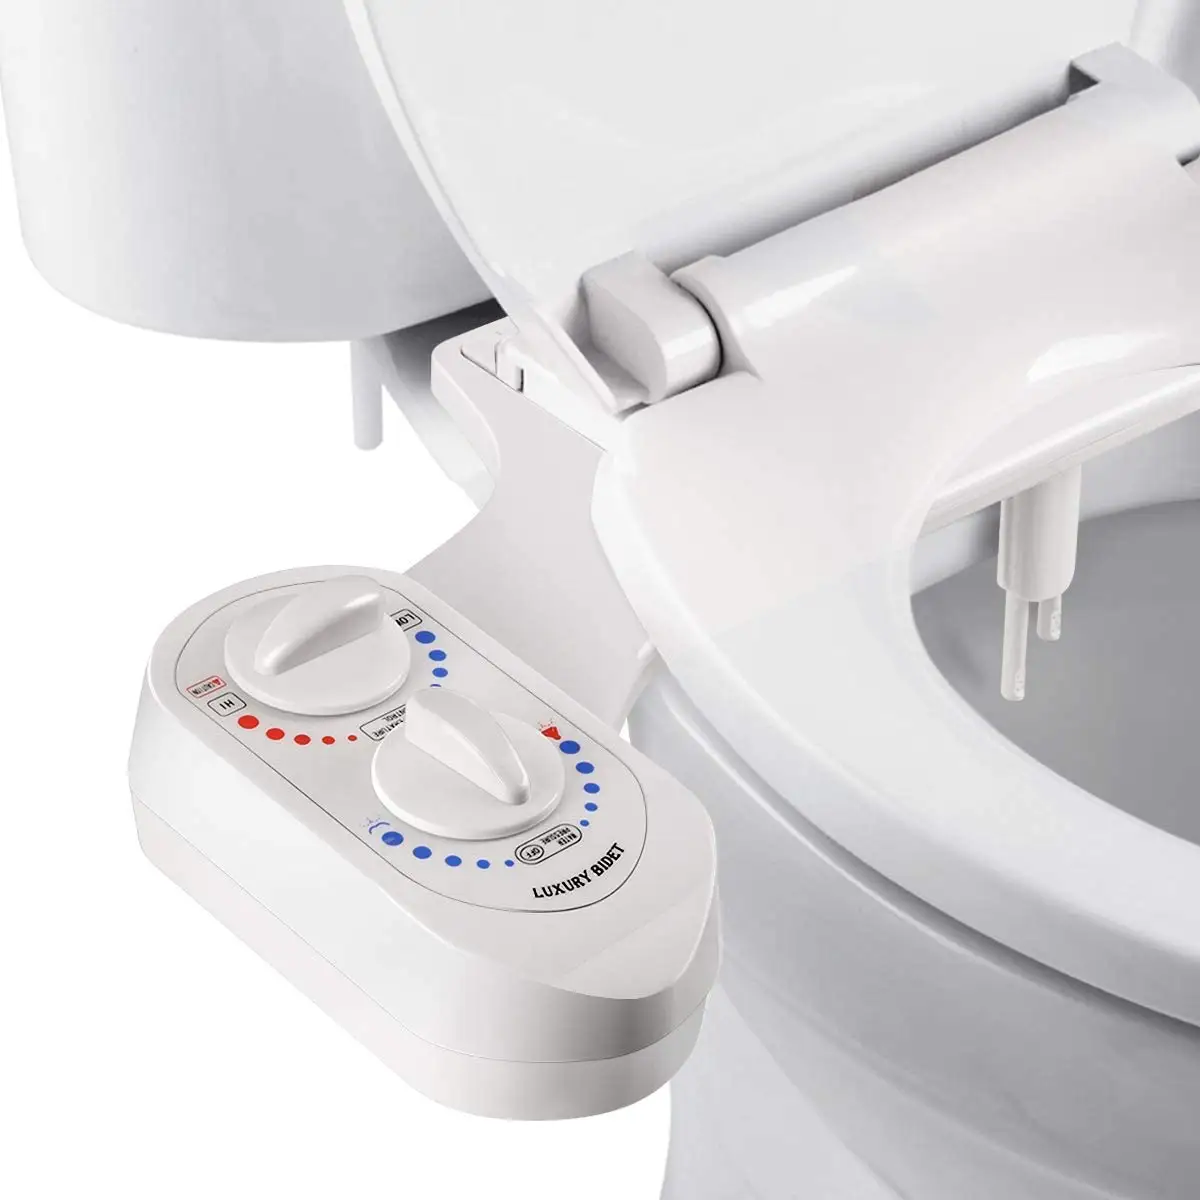 Toilet Seat Bidet Attachment Warm And Cold Water Bidet Dual Nozzle Toilet Bidet Self Cleaning Nozzle